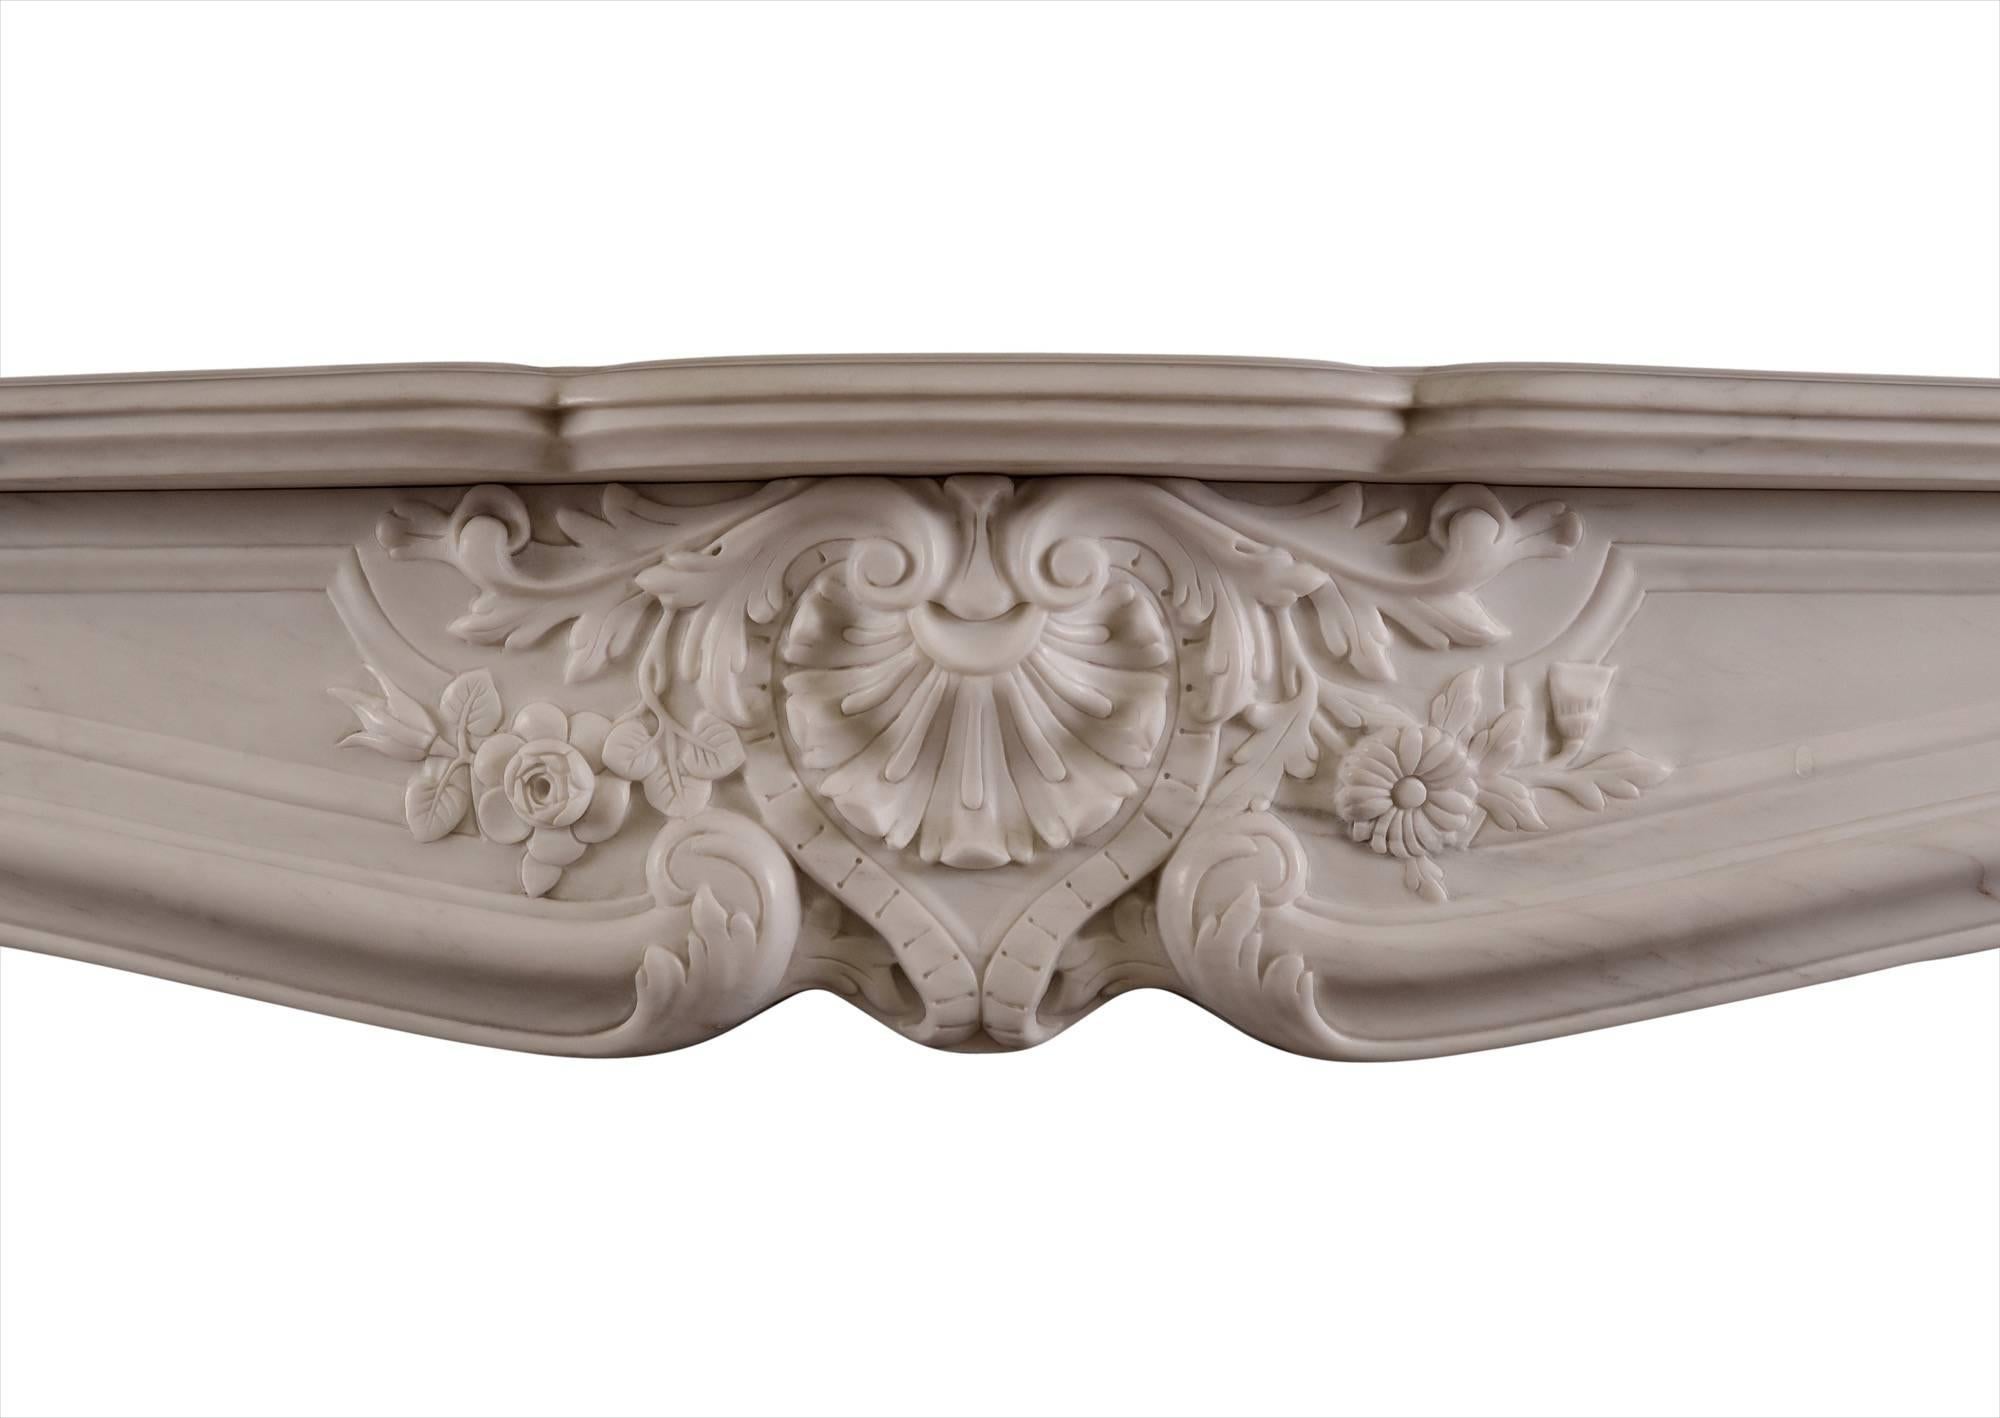 A richly carved Louis XV style fireplace in white marble. The flowing frieze with carved shell, flowers and foliage, shaped jambs with scroll and shell to top, leading the floral drops and stiff acanthus leaves below. Serpentine shaped shelf. The